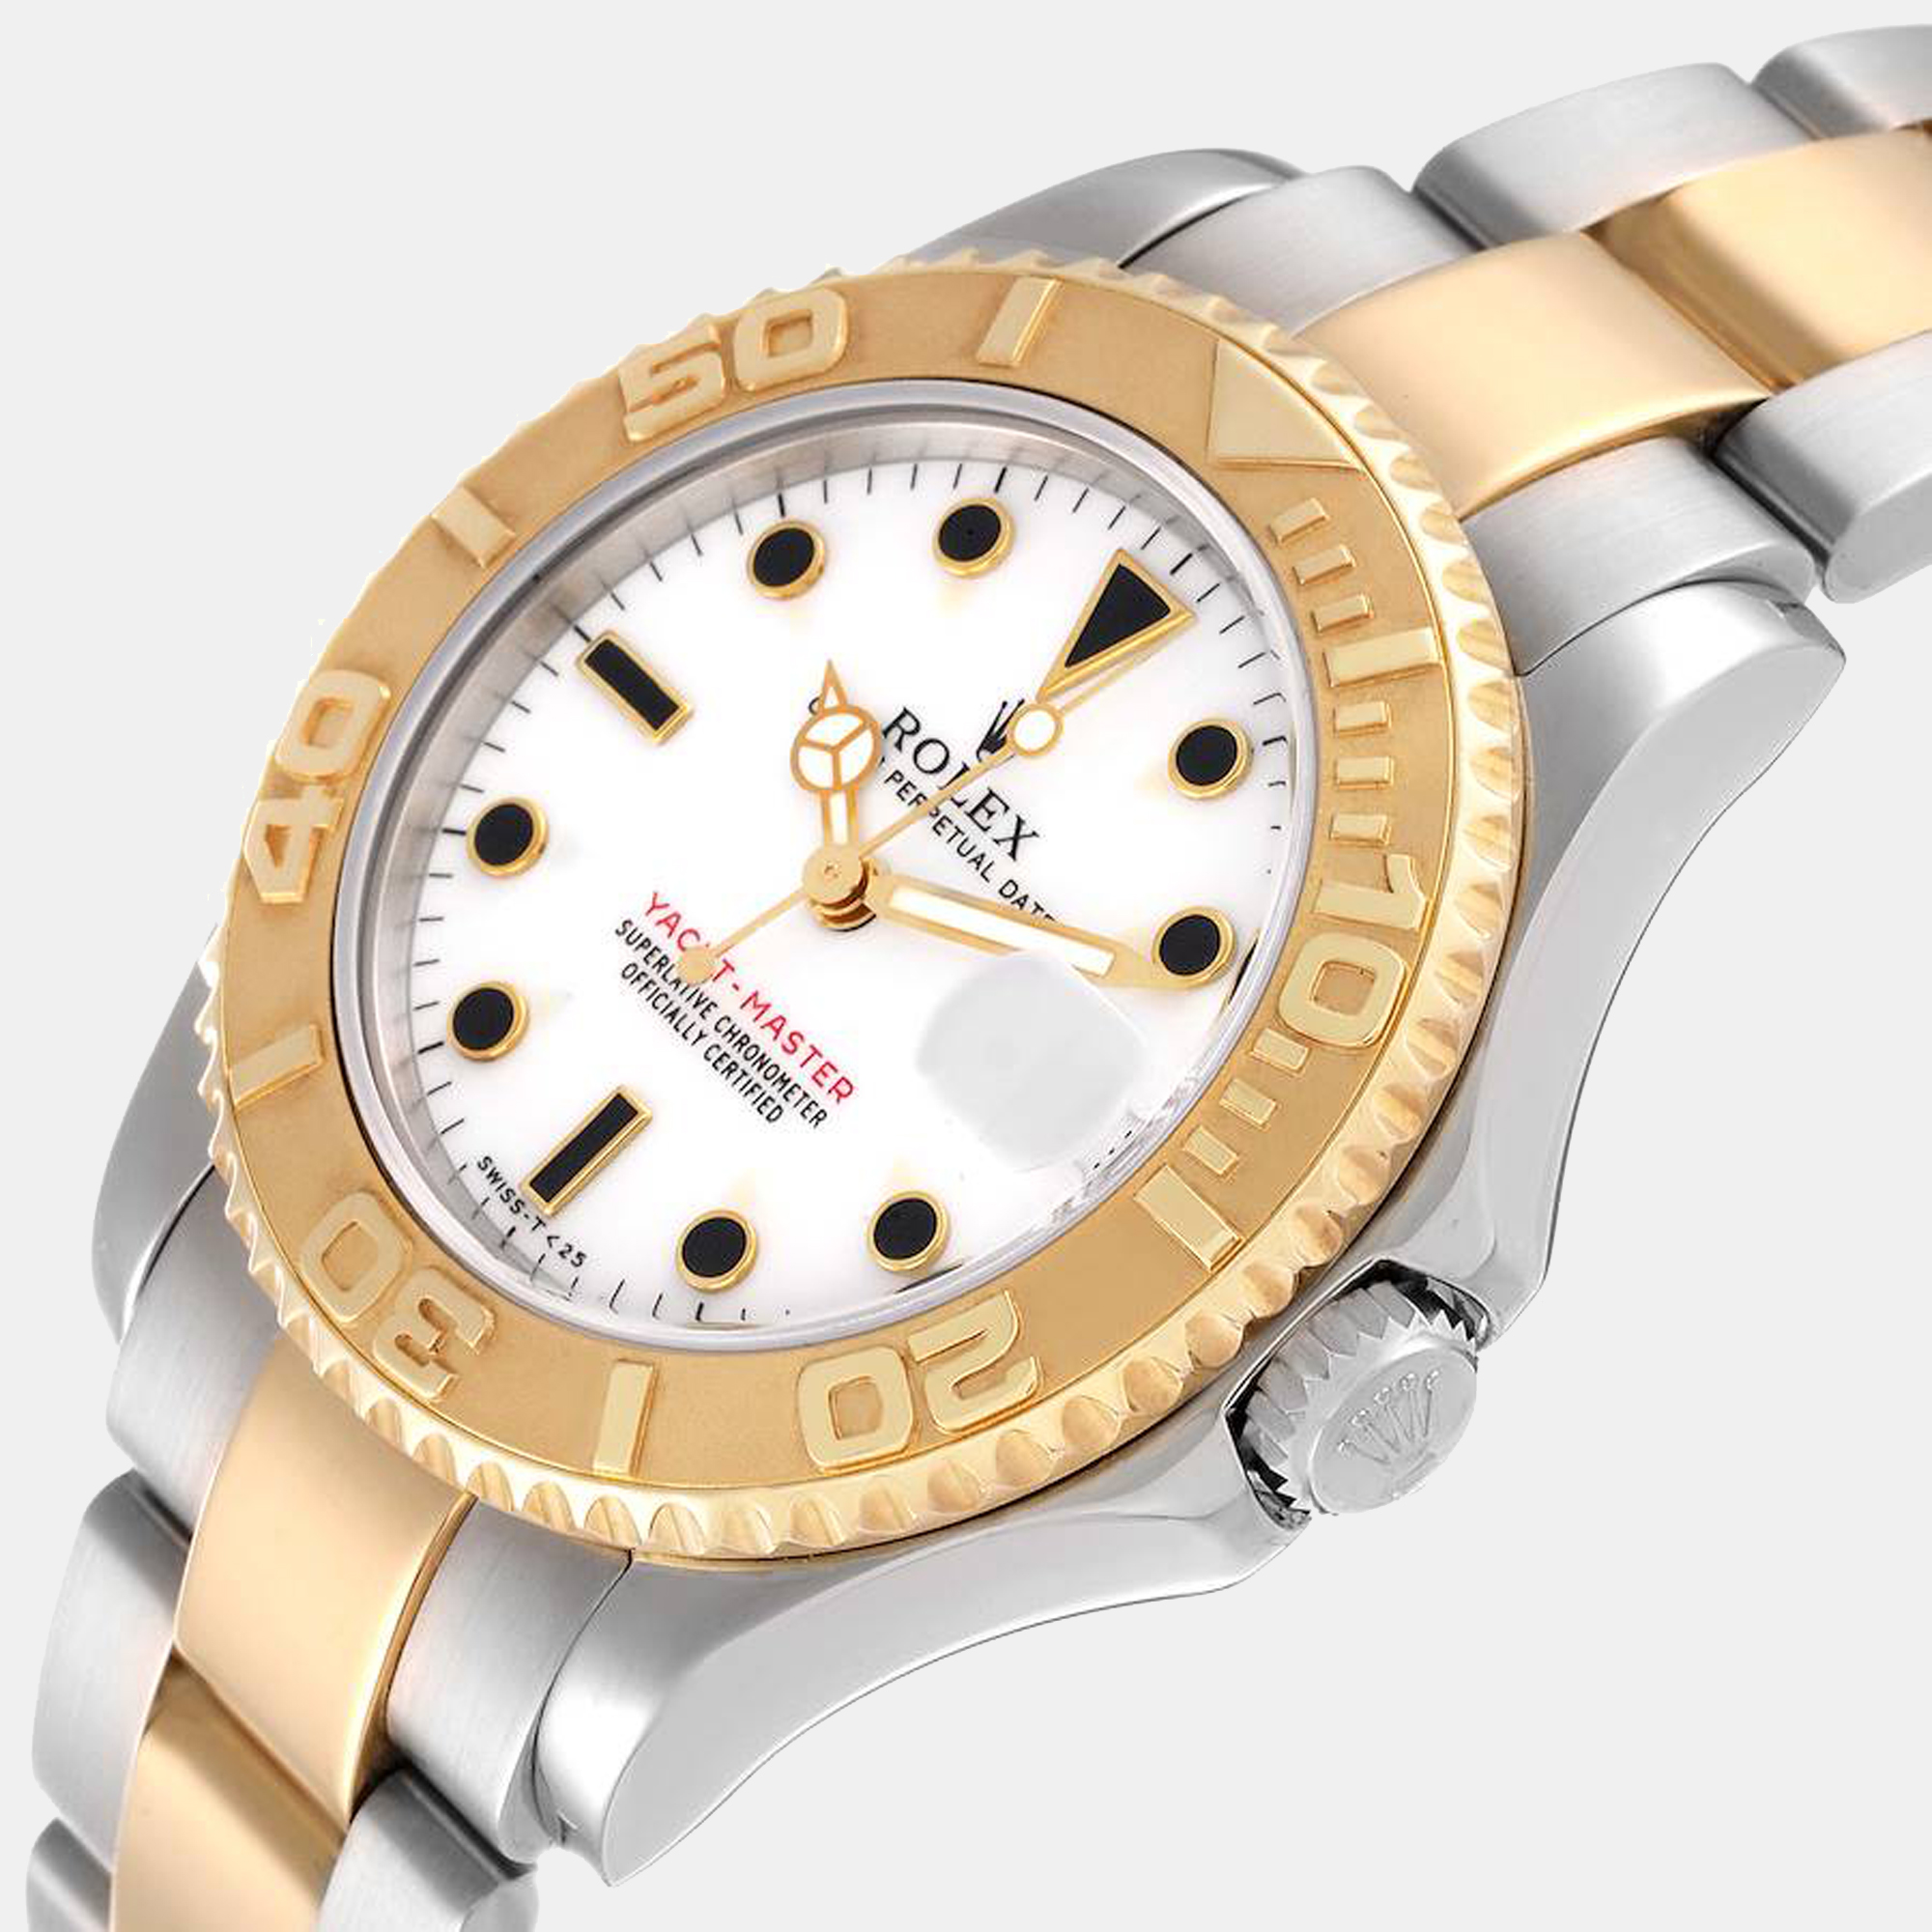 

Rolex White 8K Yellow Gold And Stainless Steel Yacht-Master 68623 Men's Wristwatch 35 mm